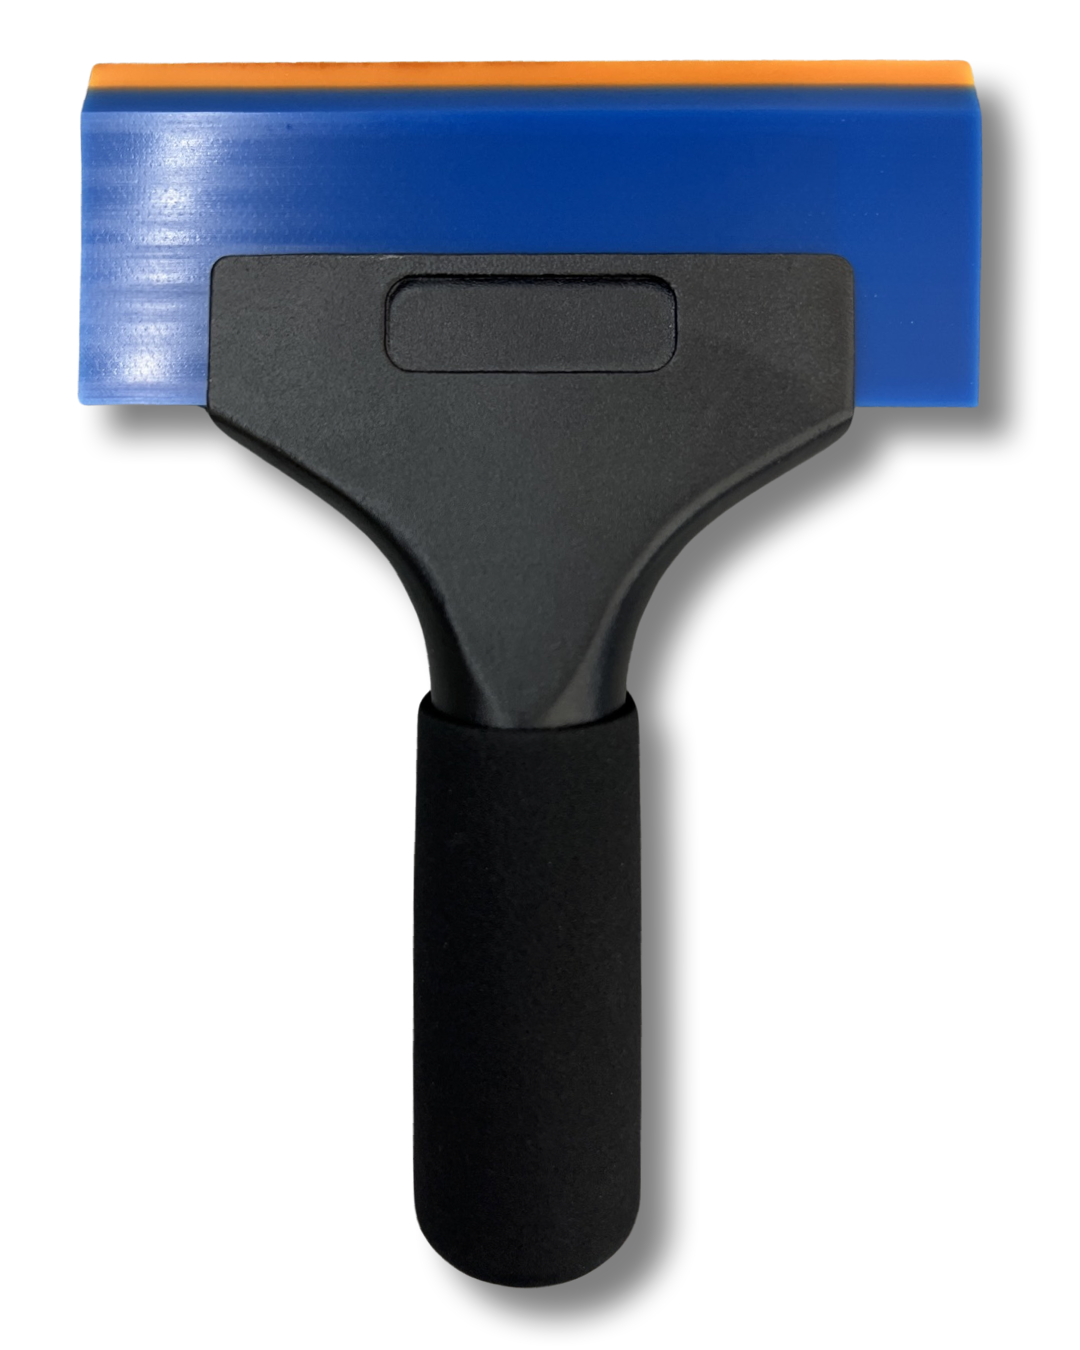 Squeegee Handle